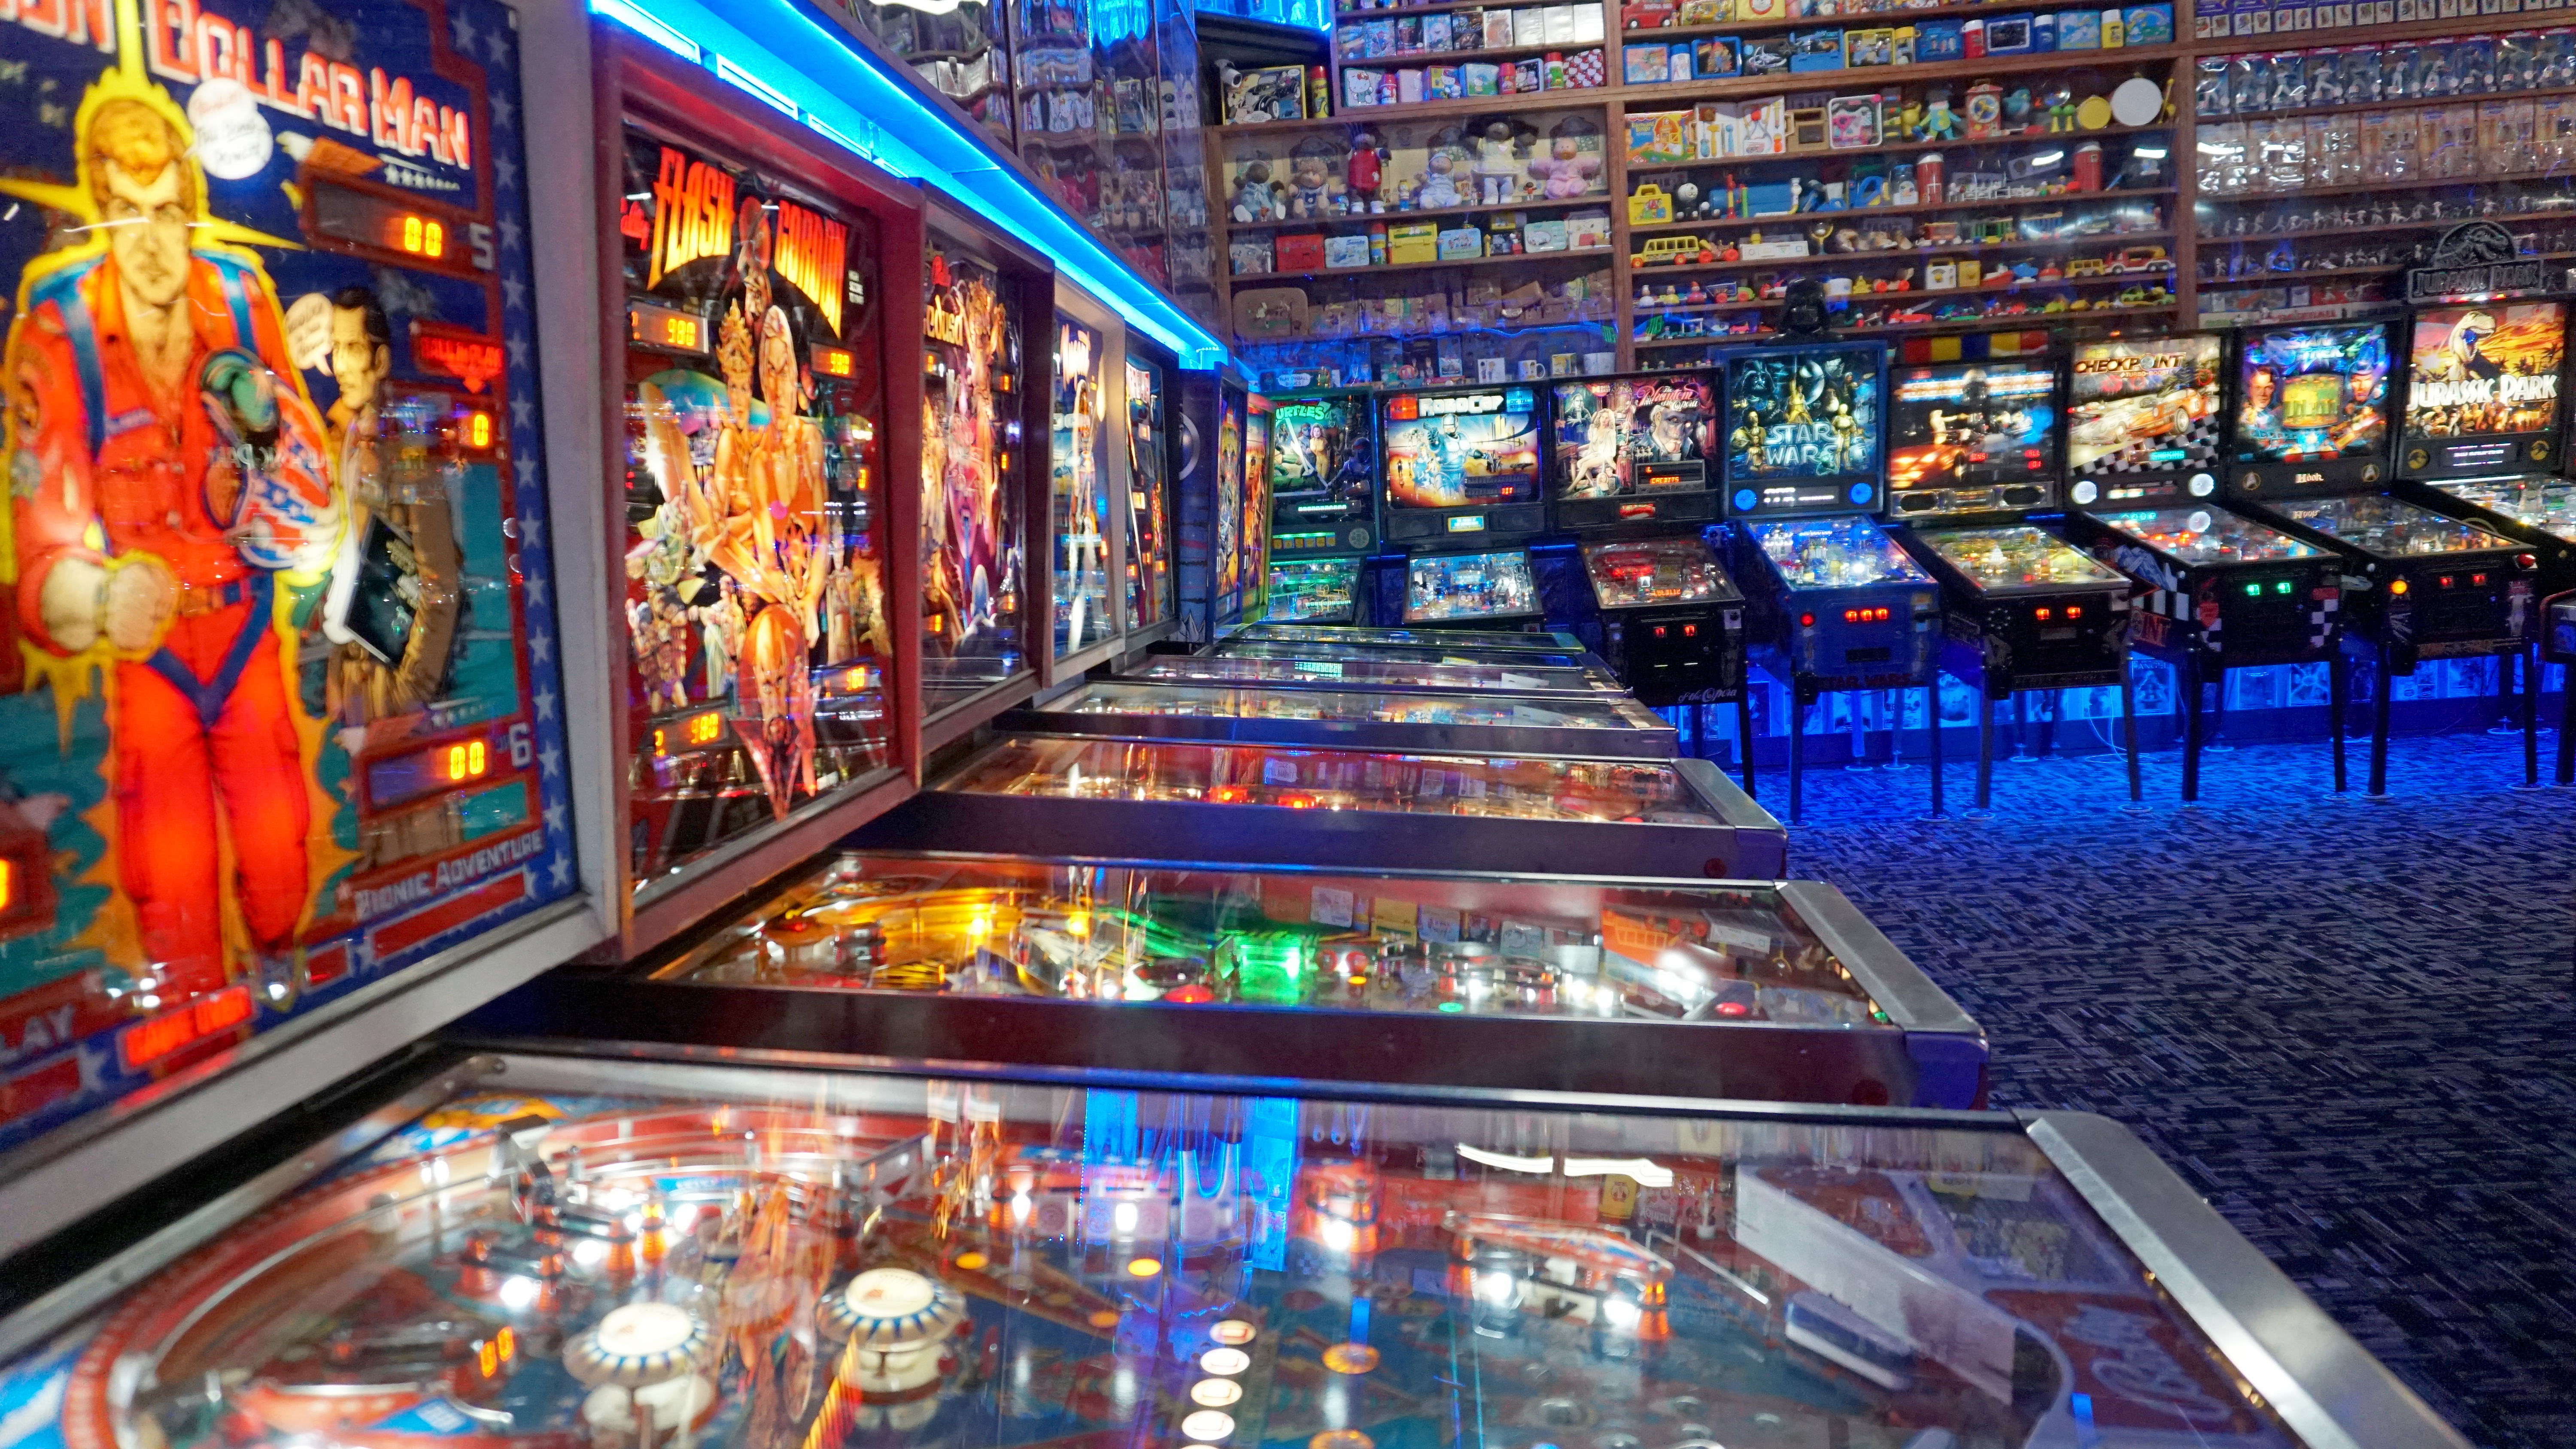 This Oregon arcade has been named the best pinball venue in the world